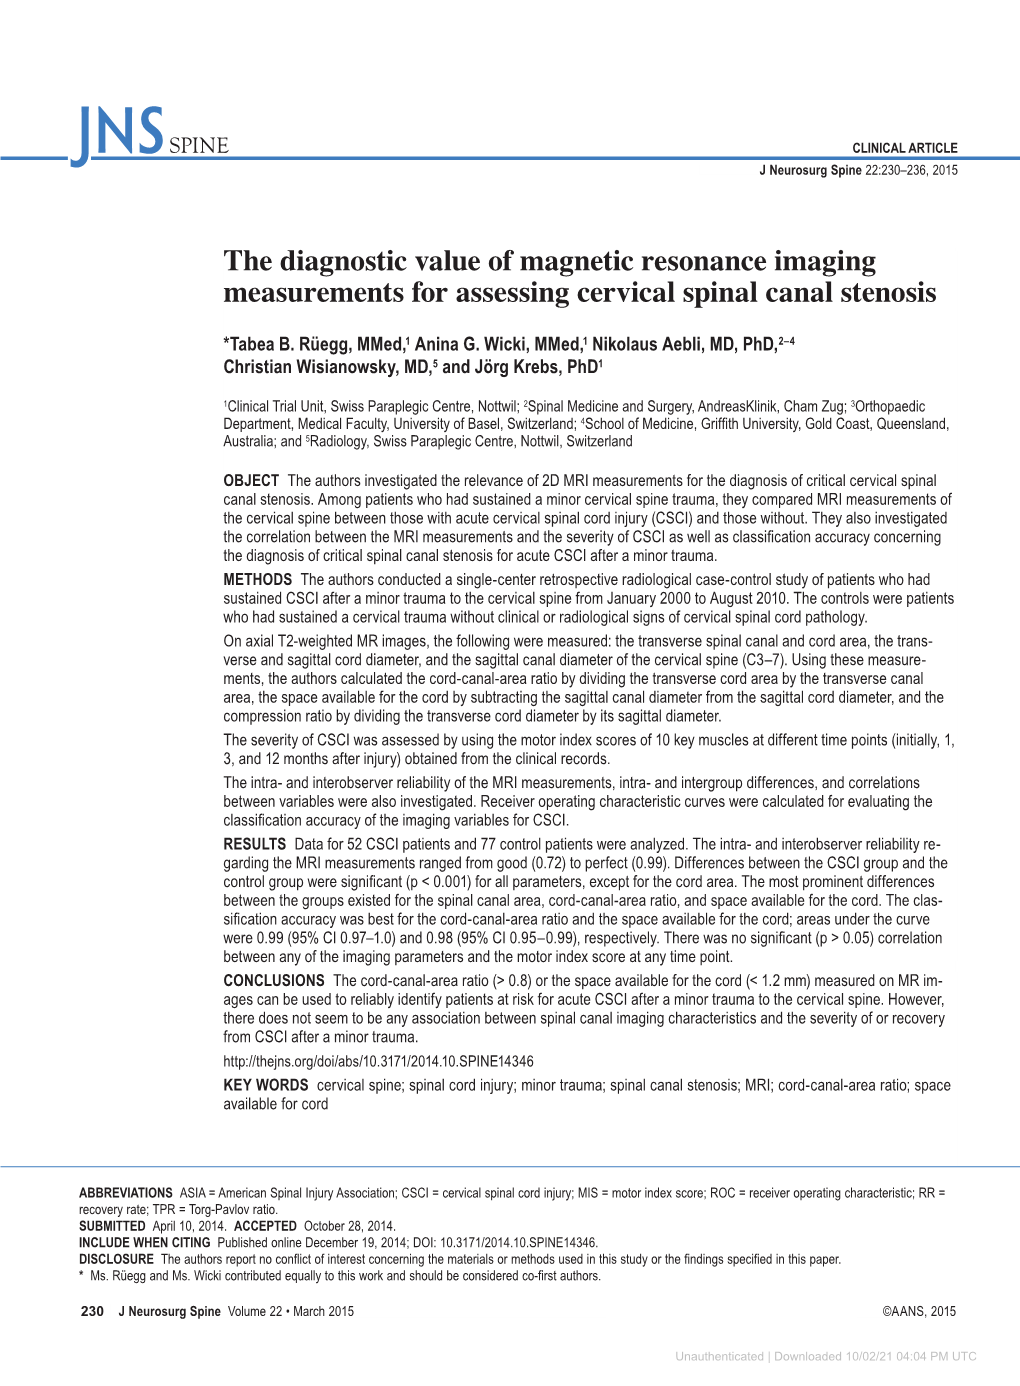 The Diagnostic Value of Magnetic Resonance Imaging Measurements for Assessing Cervical Spinal Canal Stenosis